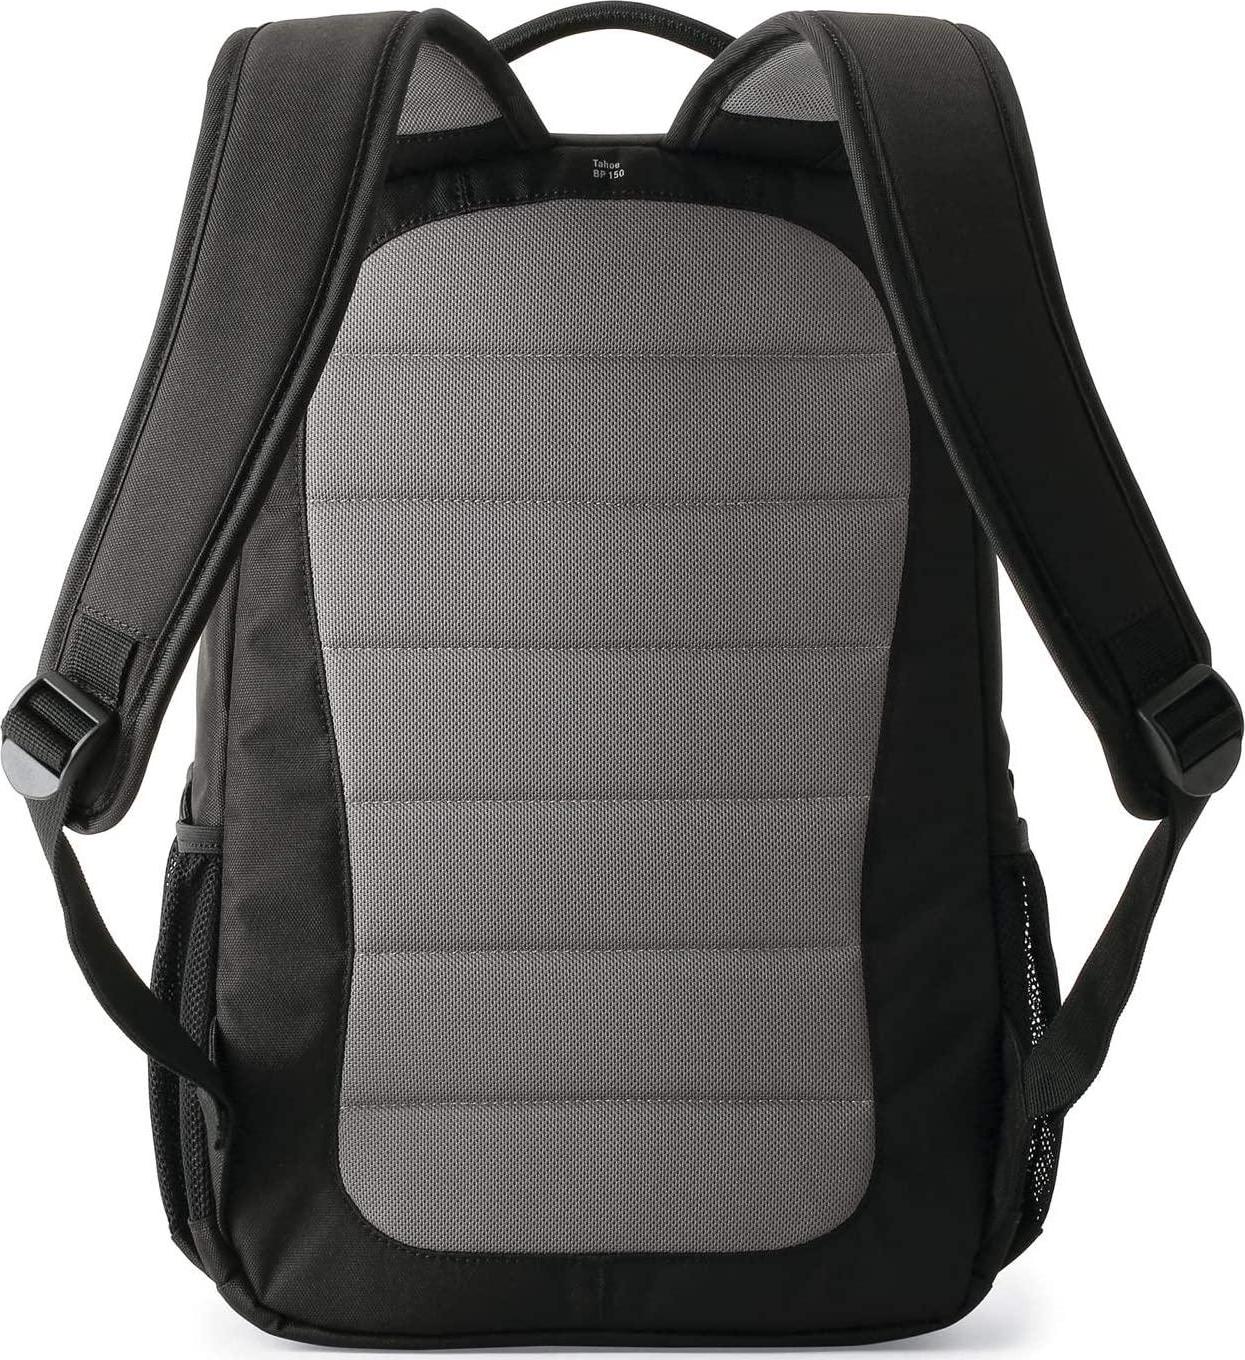 Lowepro, Lowepro Backpack Lightweight Sporty Lowepro Tahoe BP 150, Keep Your Photo Gear and Tablet Protected, Black (LP36892-PWW)